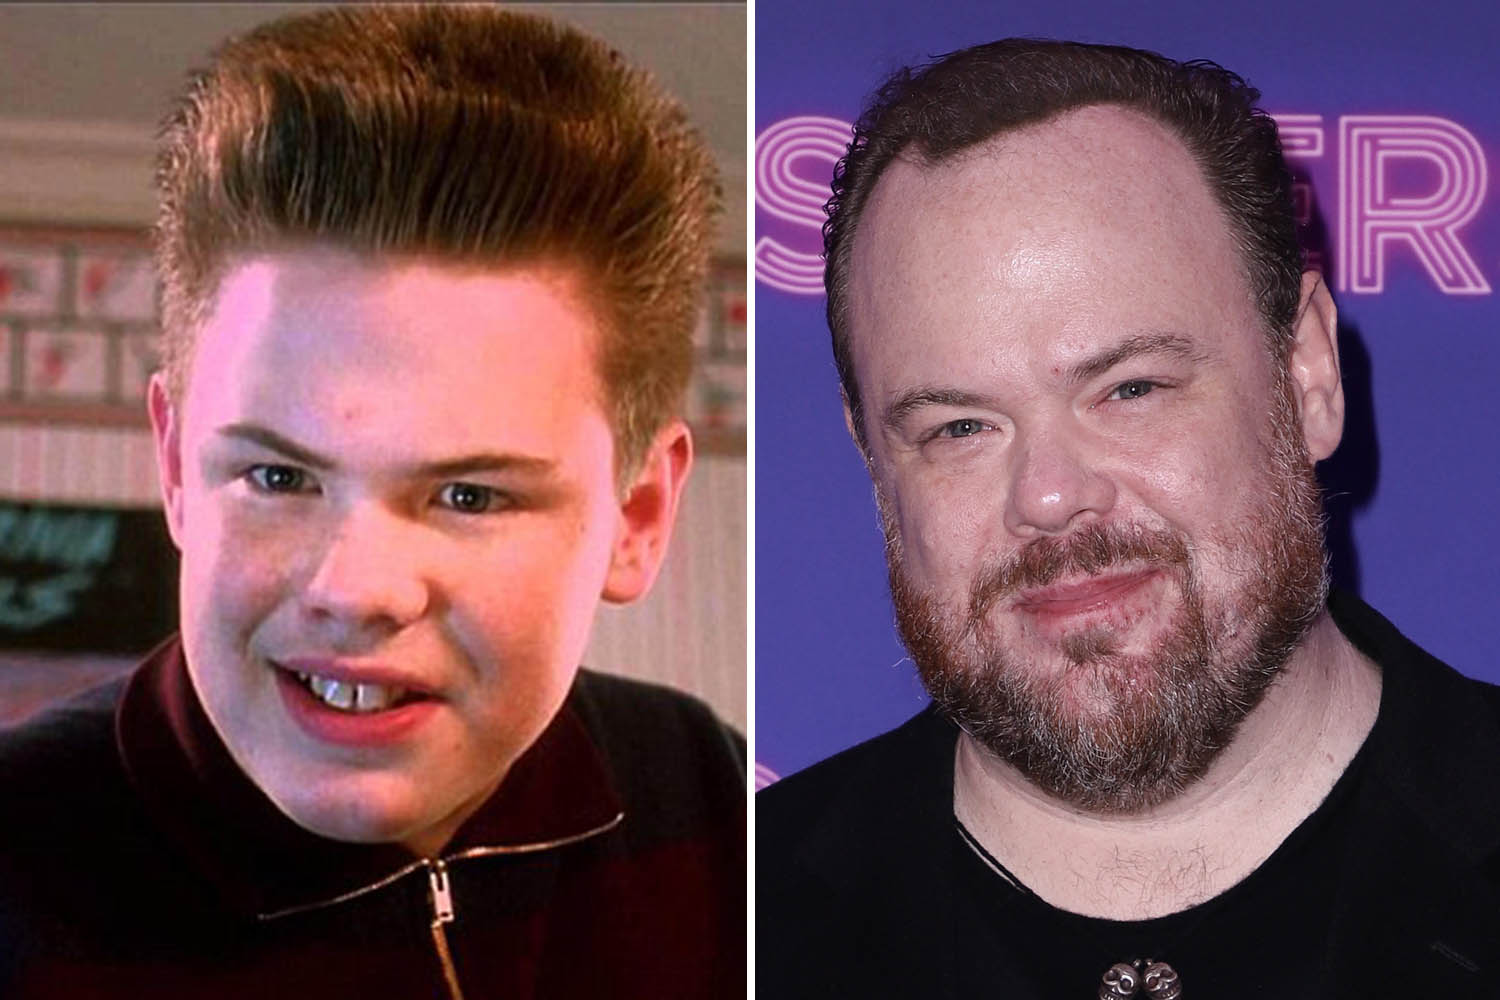 Devin Ratray is best known for playing Buzz on Home Alone